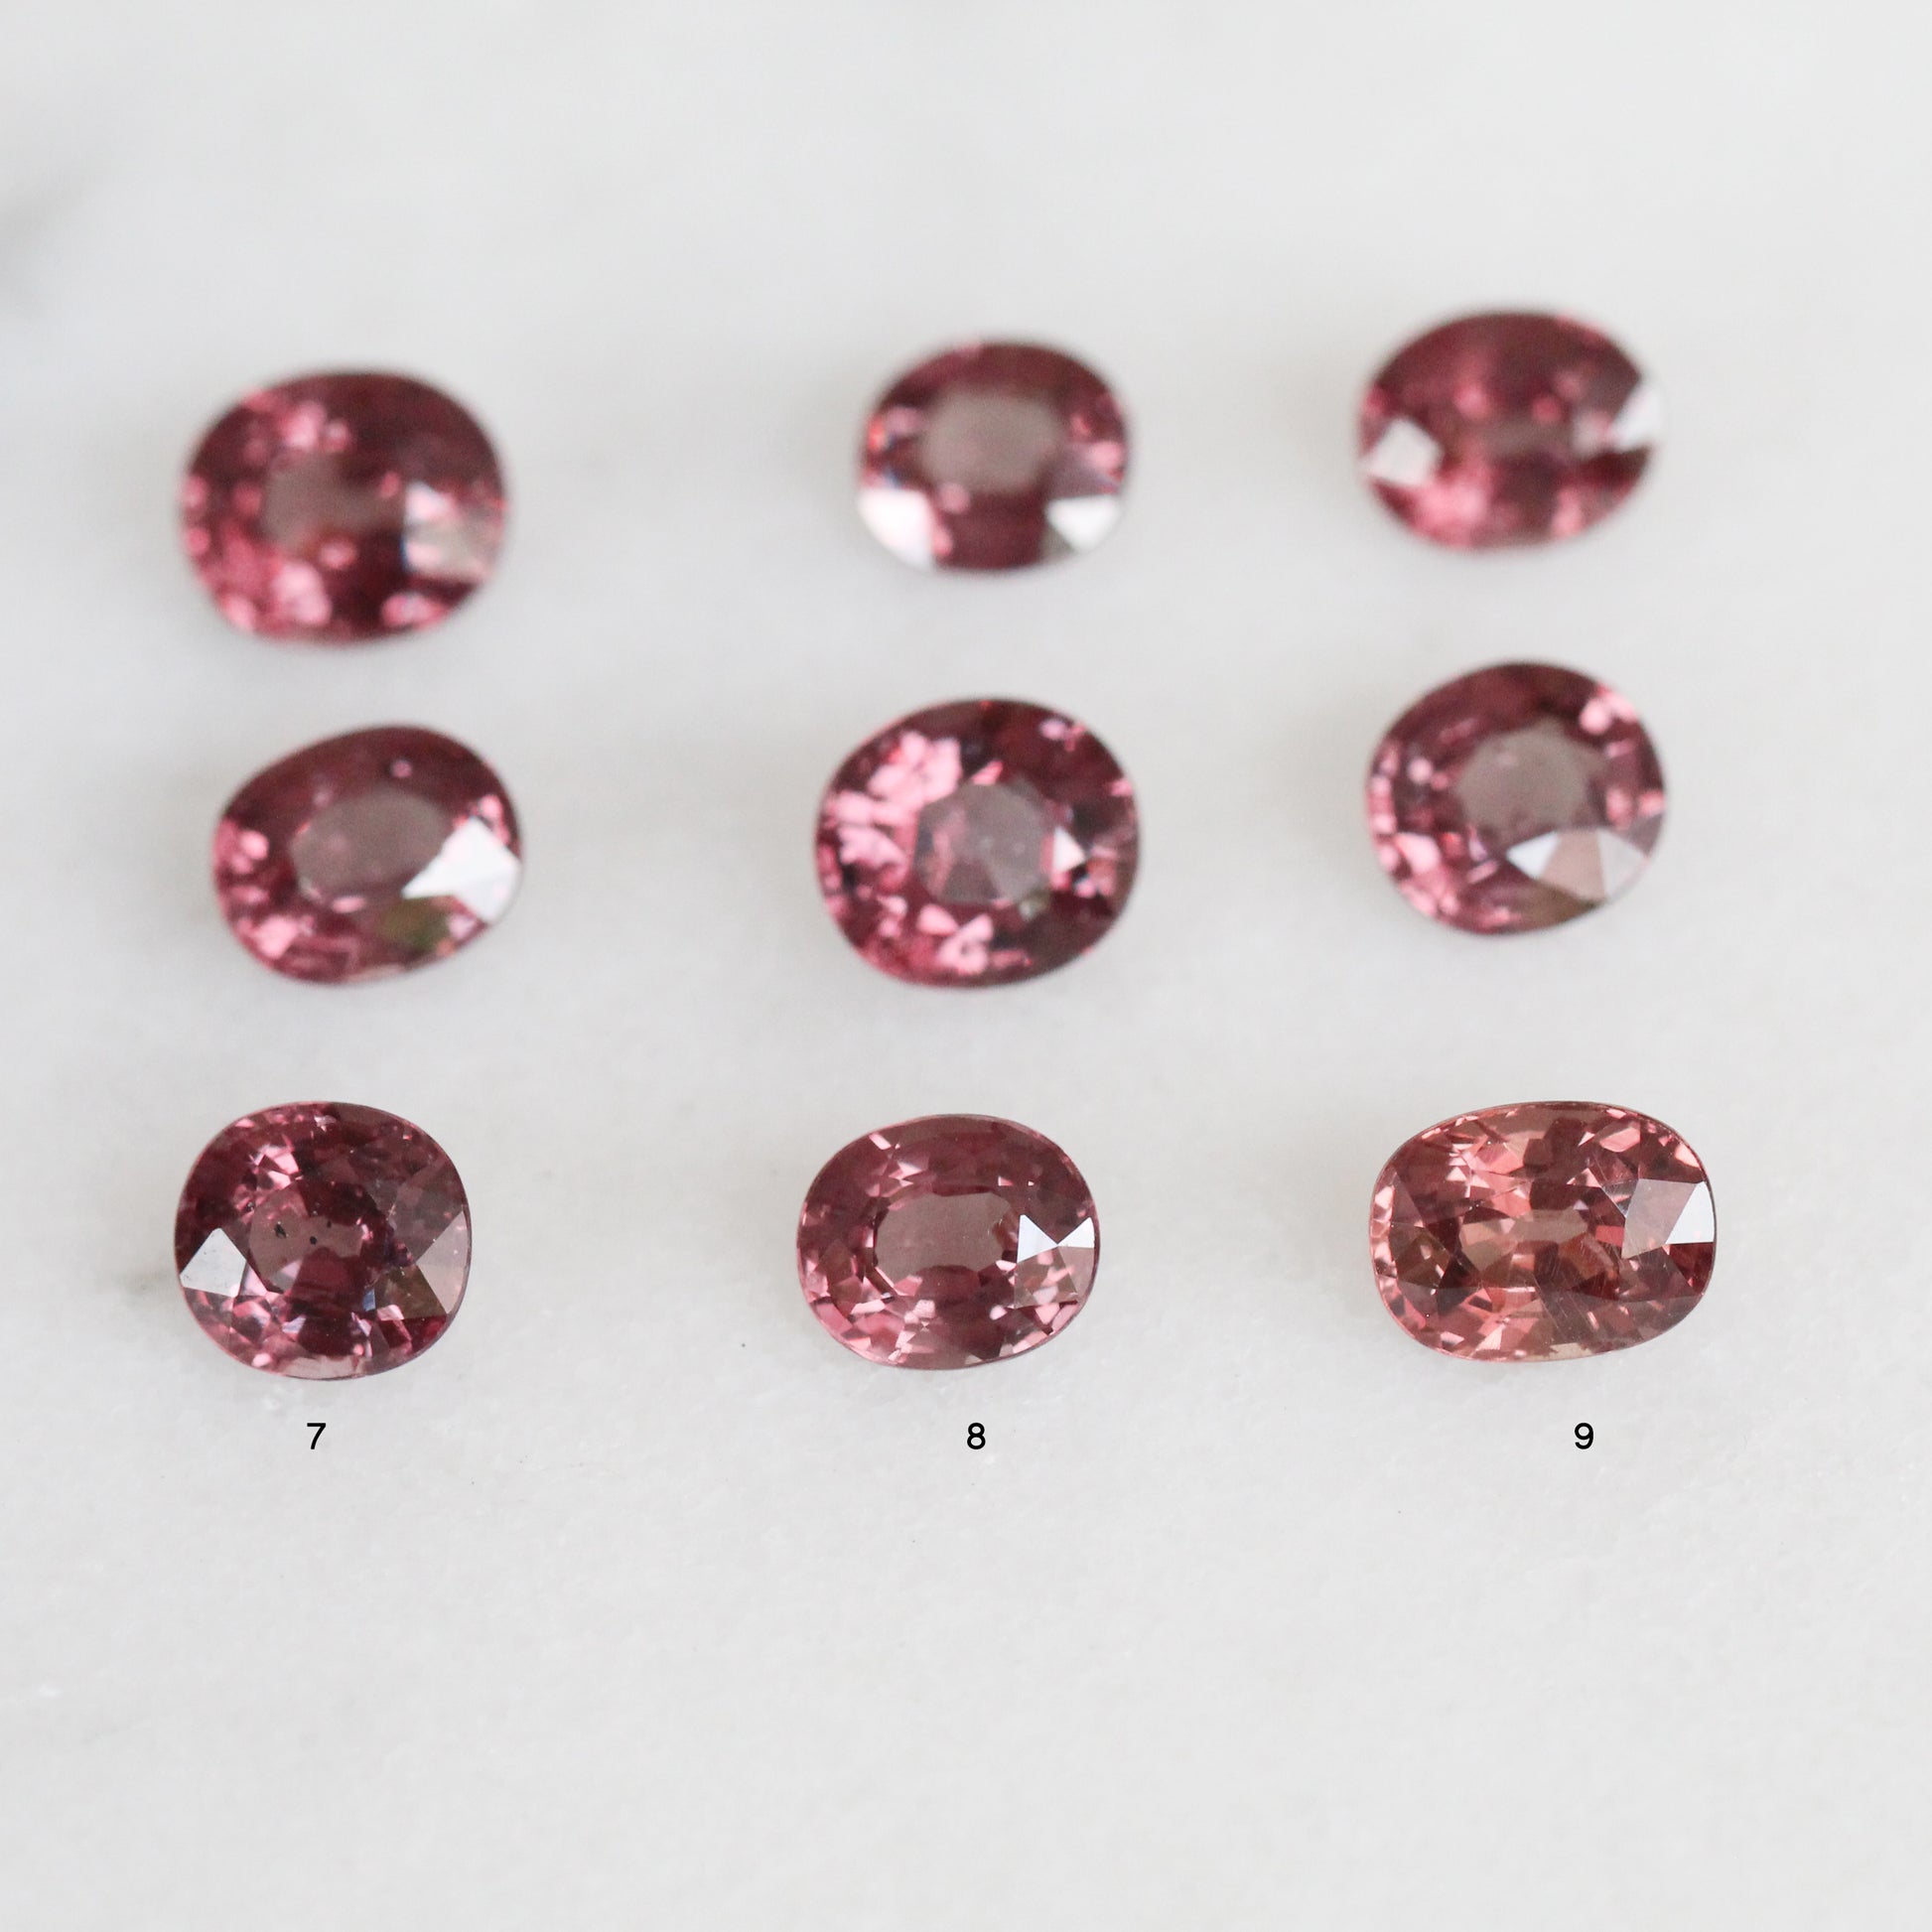 Color change Garnet oval stones to create a custom ring - Pick yours! - Inventory for custom work - Midwinter Co. Alternative Bridal Rings and Modern Fine Jewelry